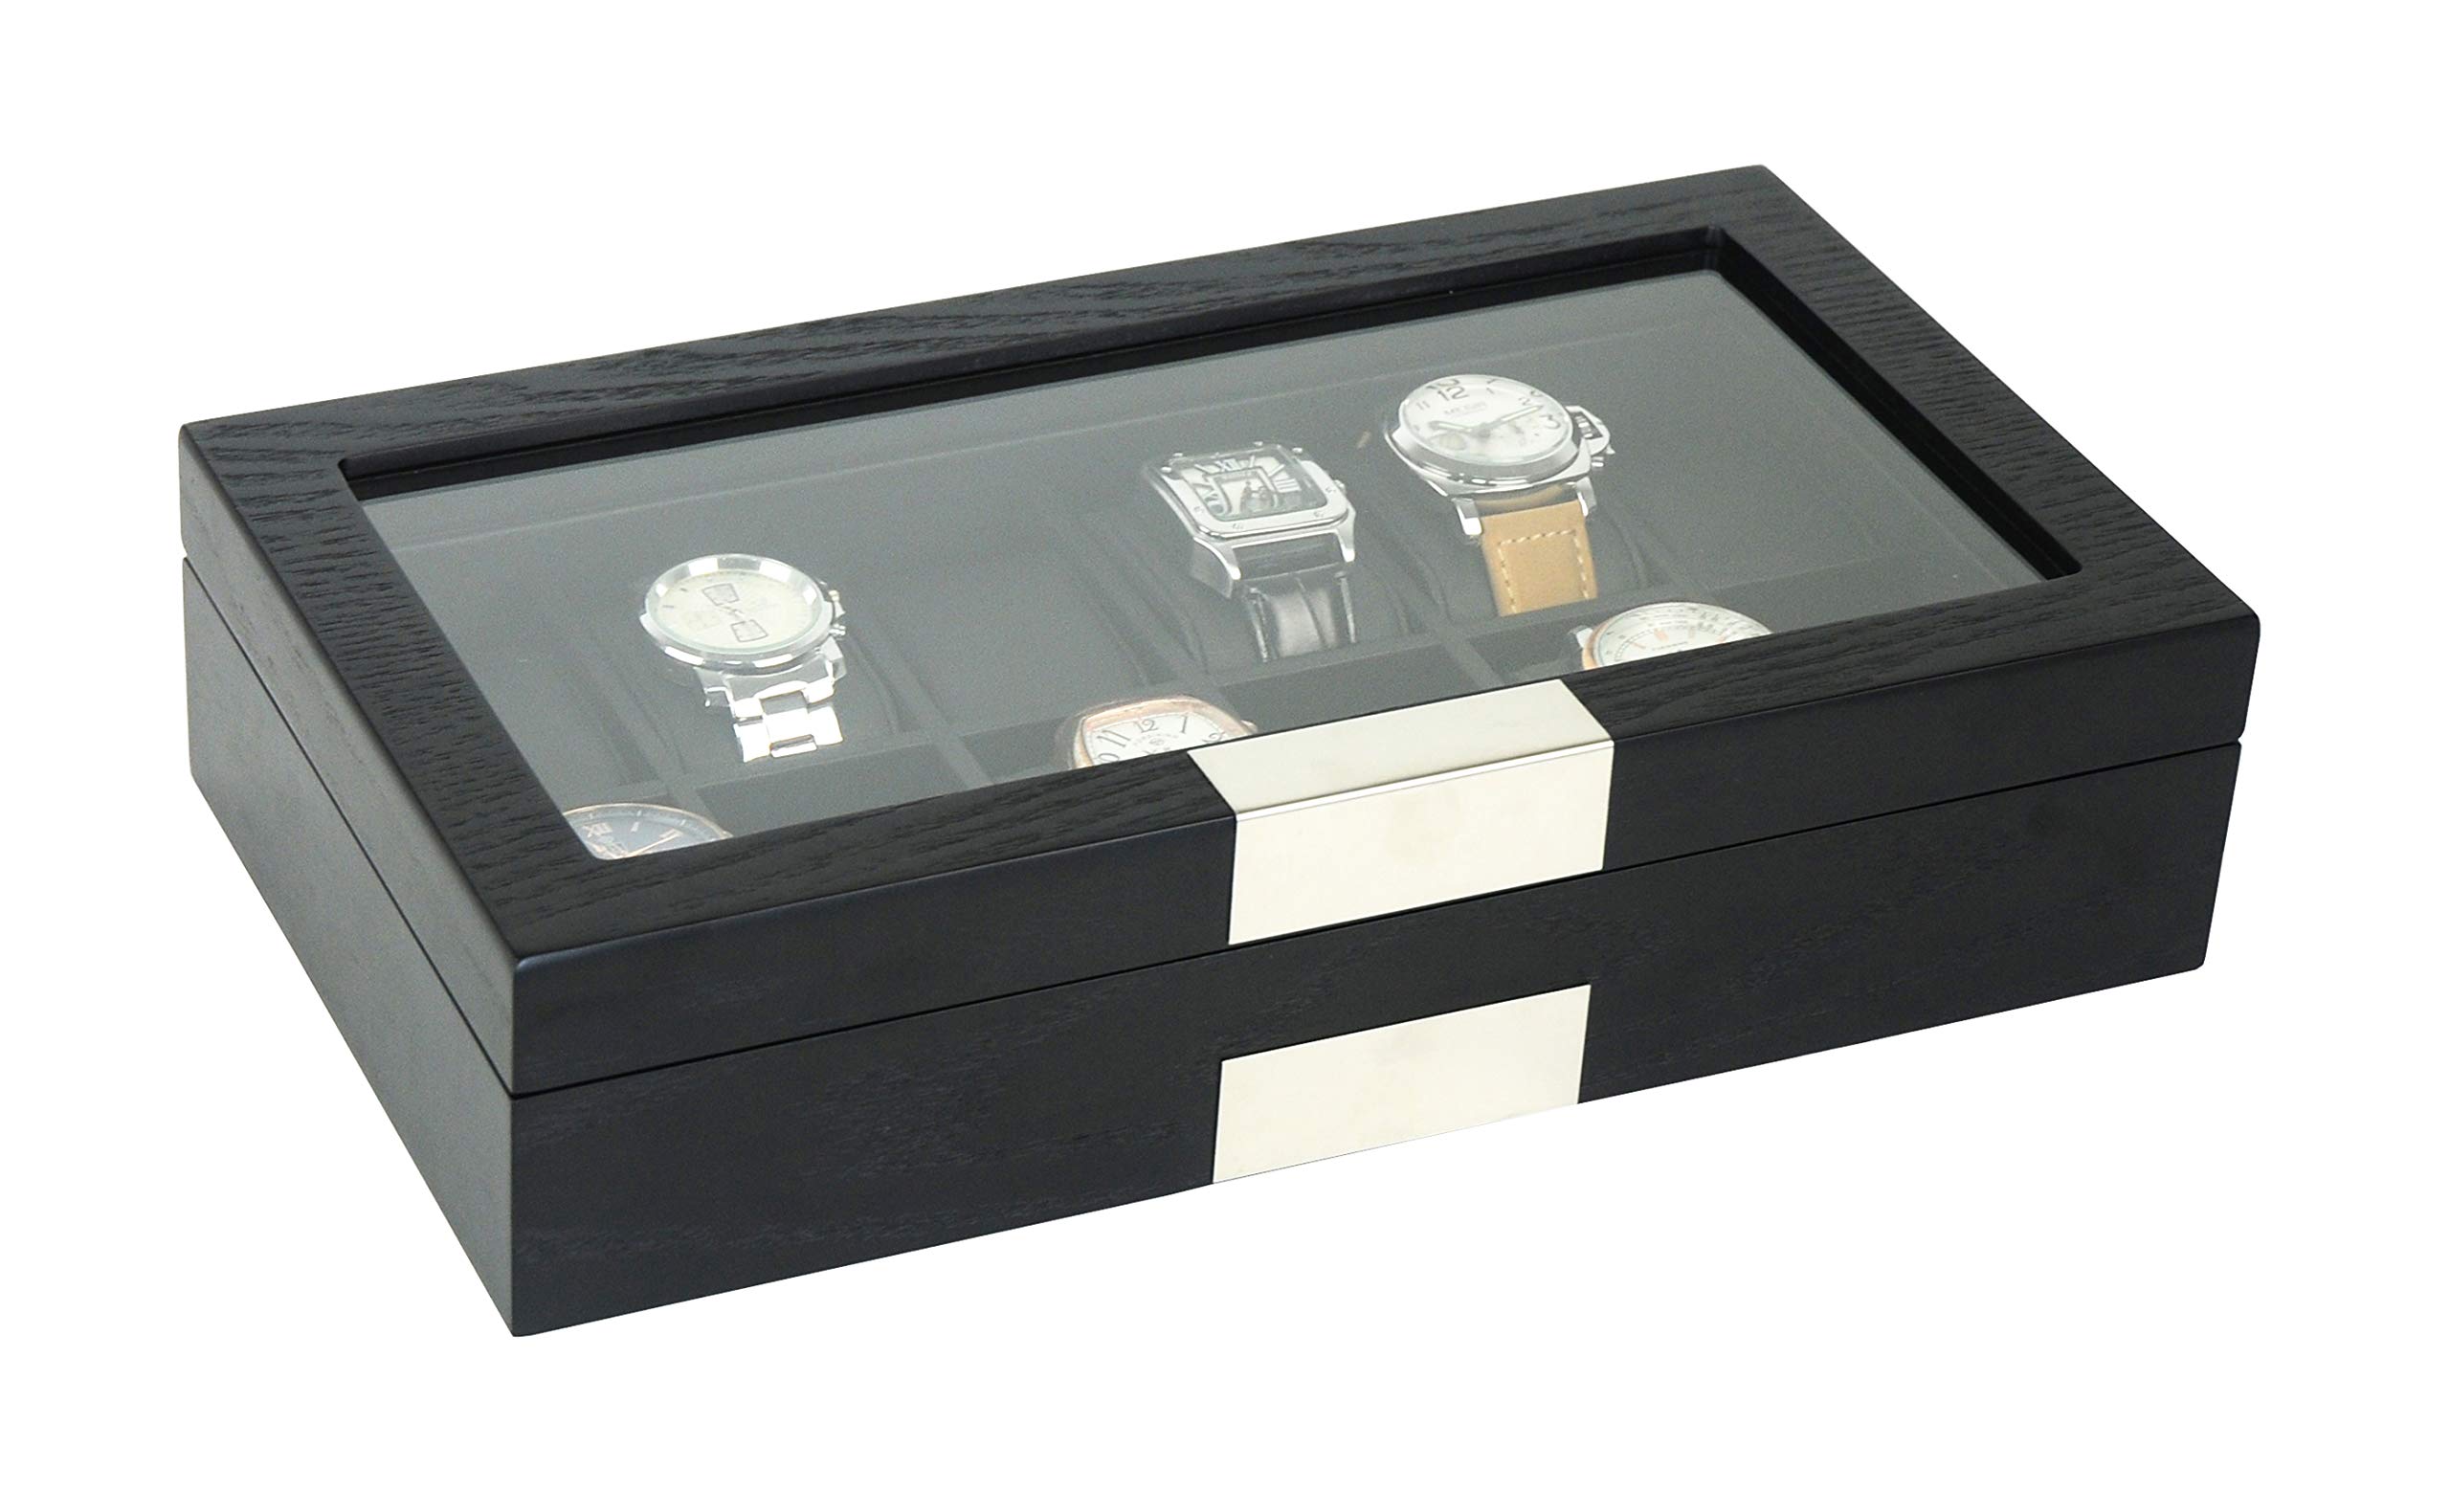 TIMELYBUYS Personalized 12 Black Wood Watch Box Display Case Storage Jewelry Organizer with Glass Top, Stainless Steel Accents, and Oversized Deluxe Pillows